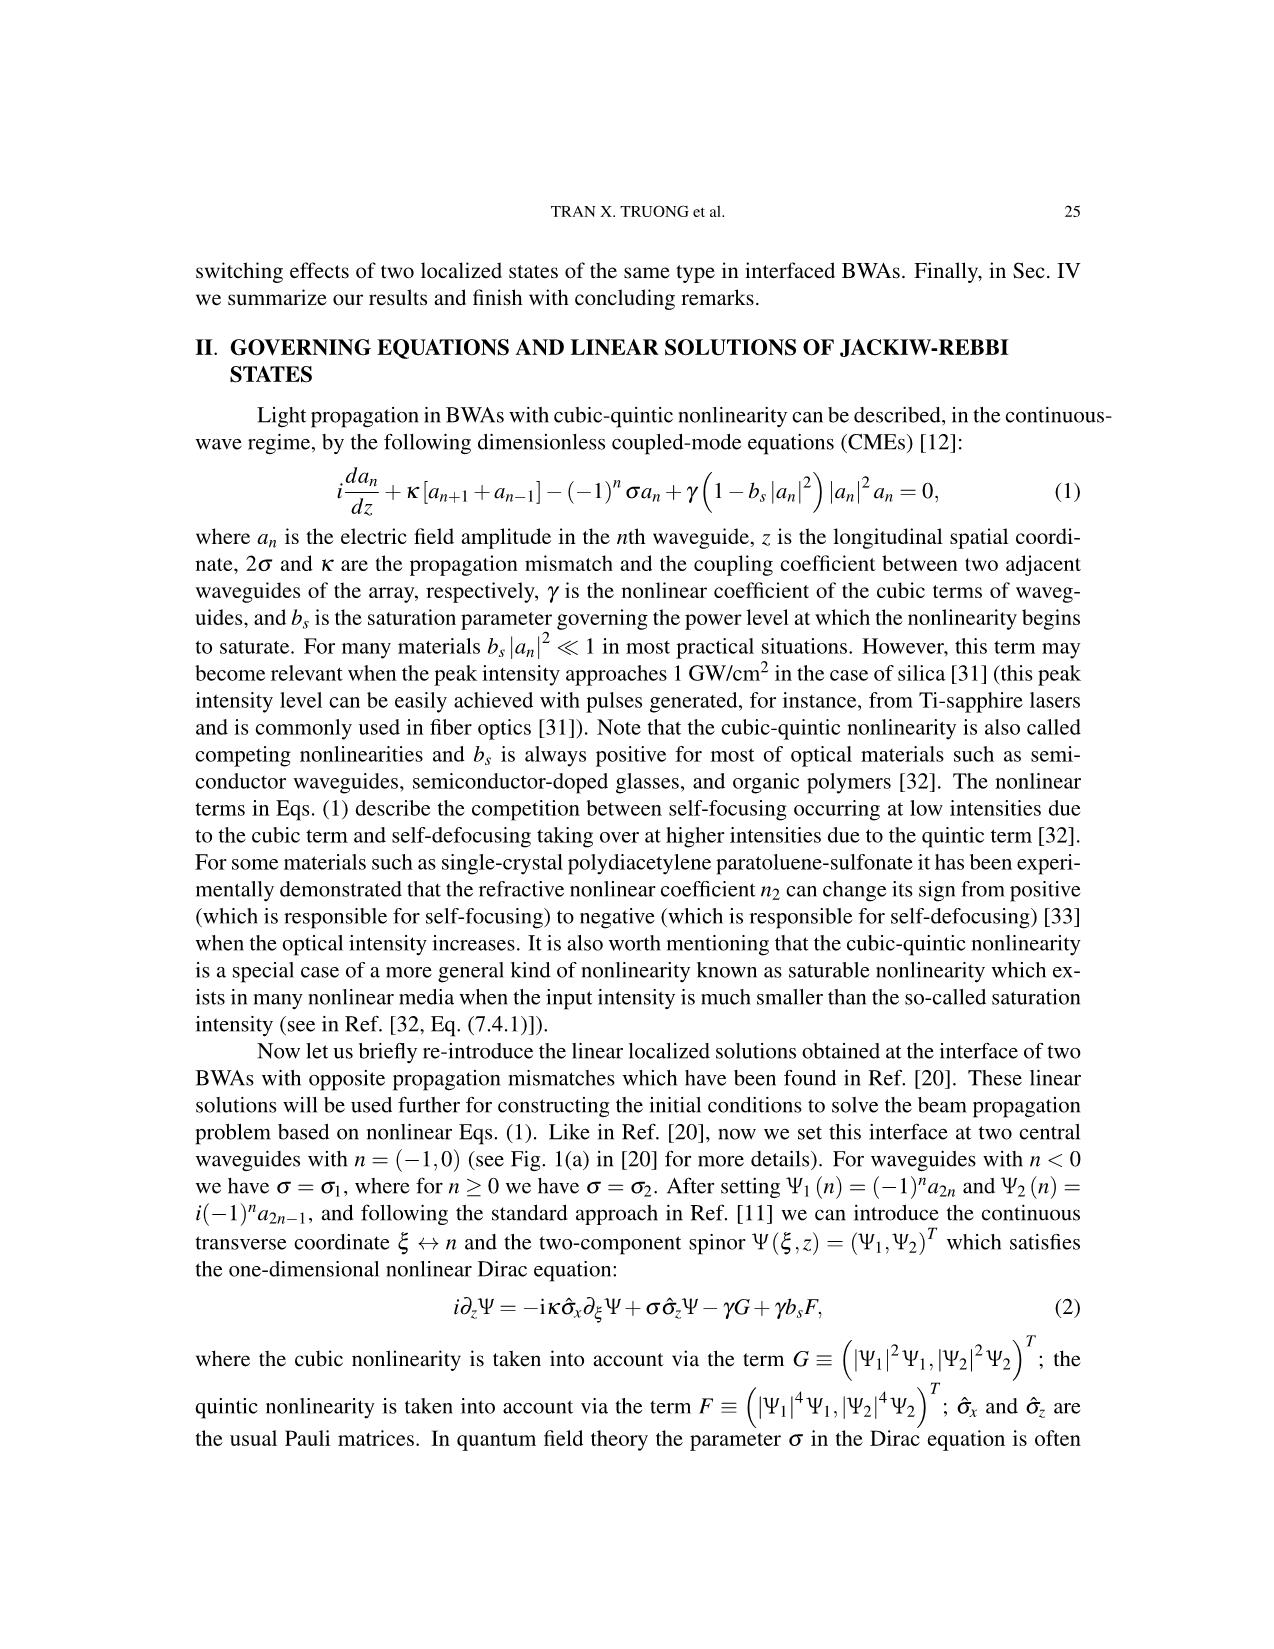 Interaction between two jackiw - rebbi states in interfaced binary waveguide arrays with cubic - quintic nonlinearity trang 3